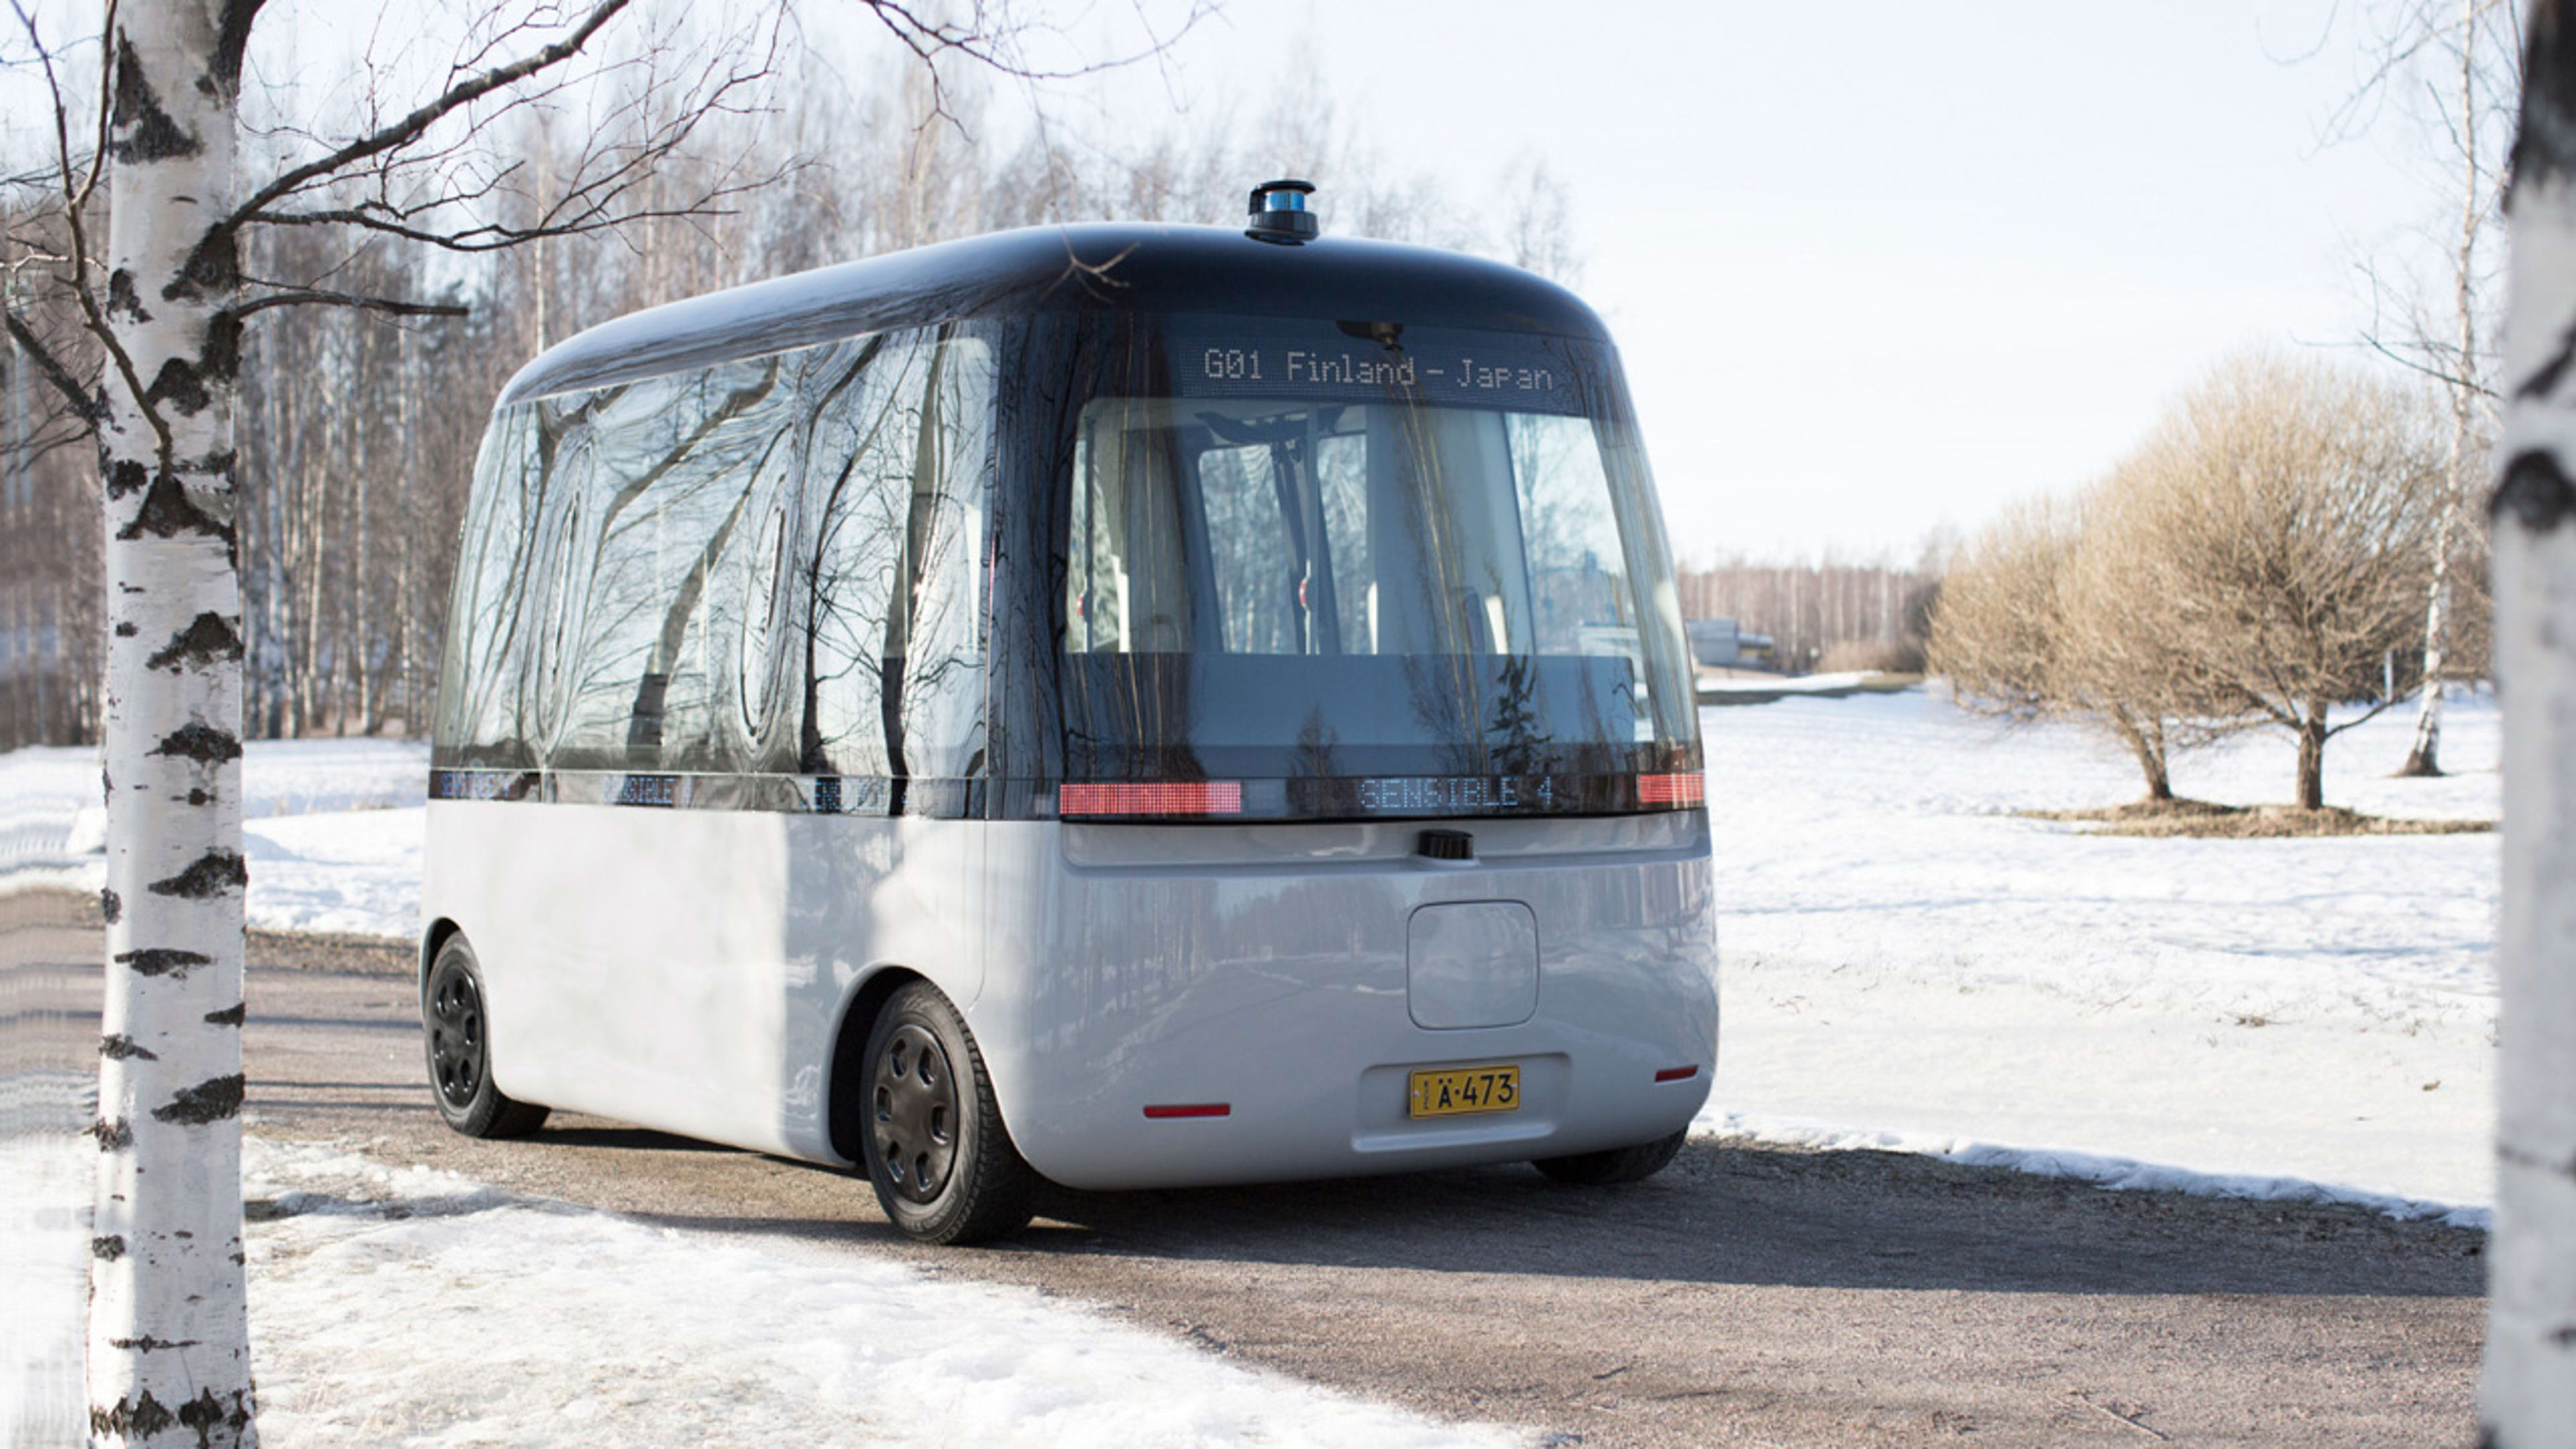 Muji’s adorable autonomous bus hits the road in Finland